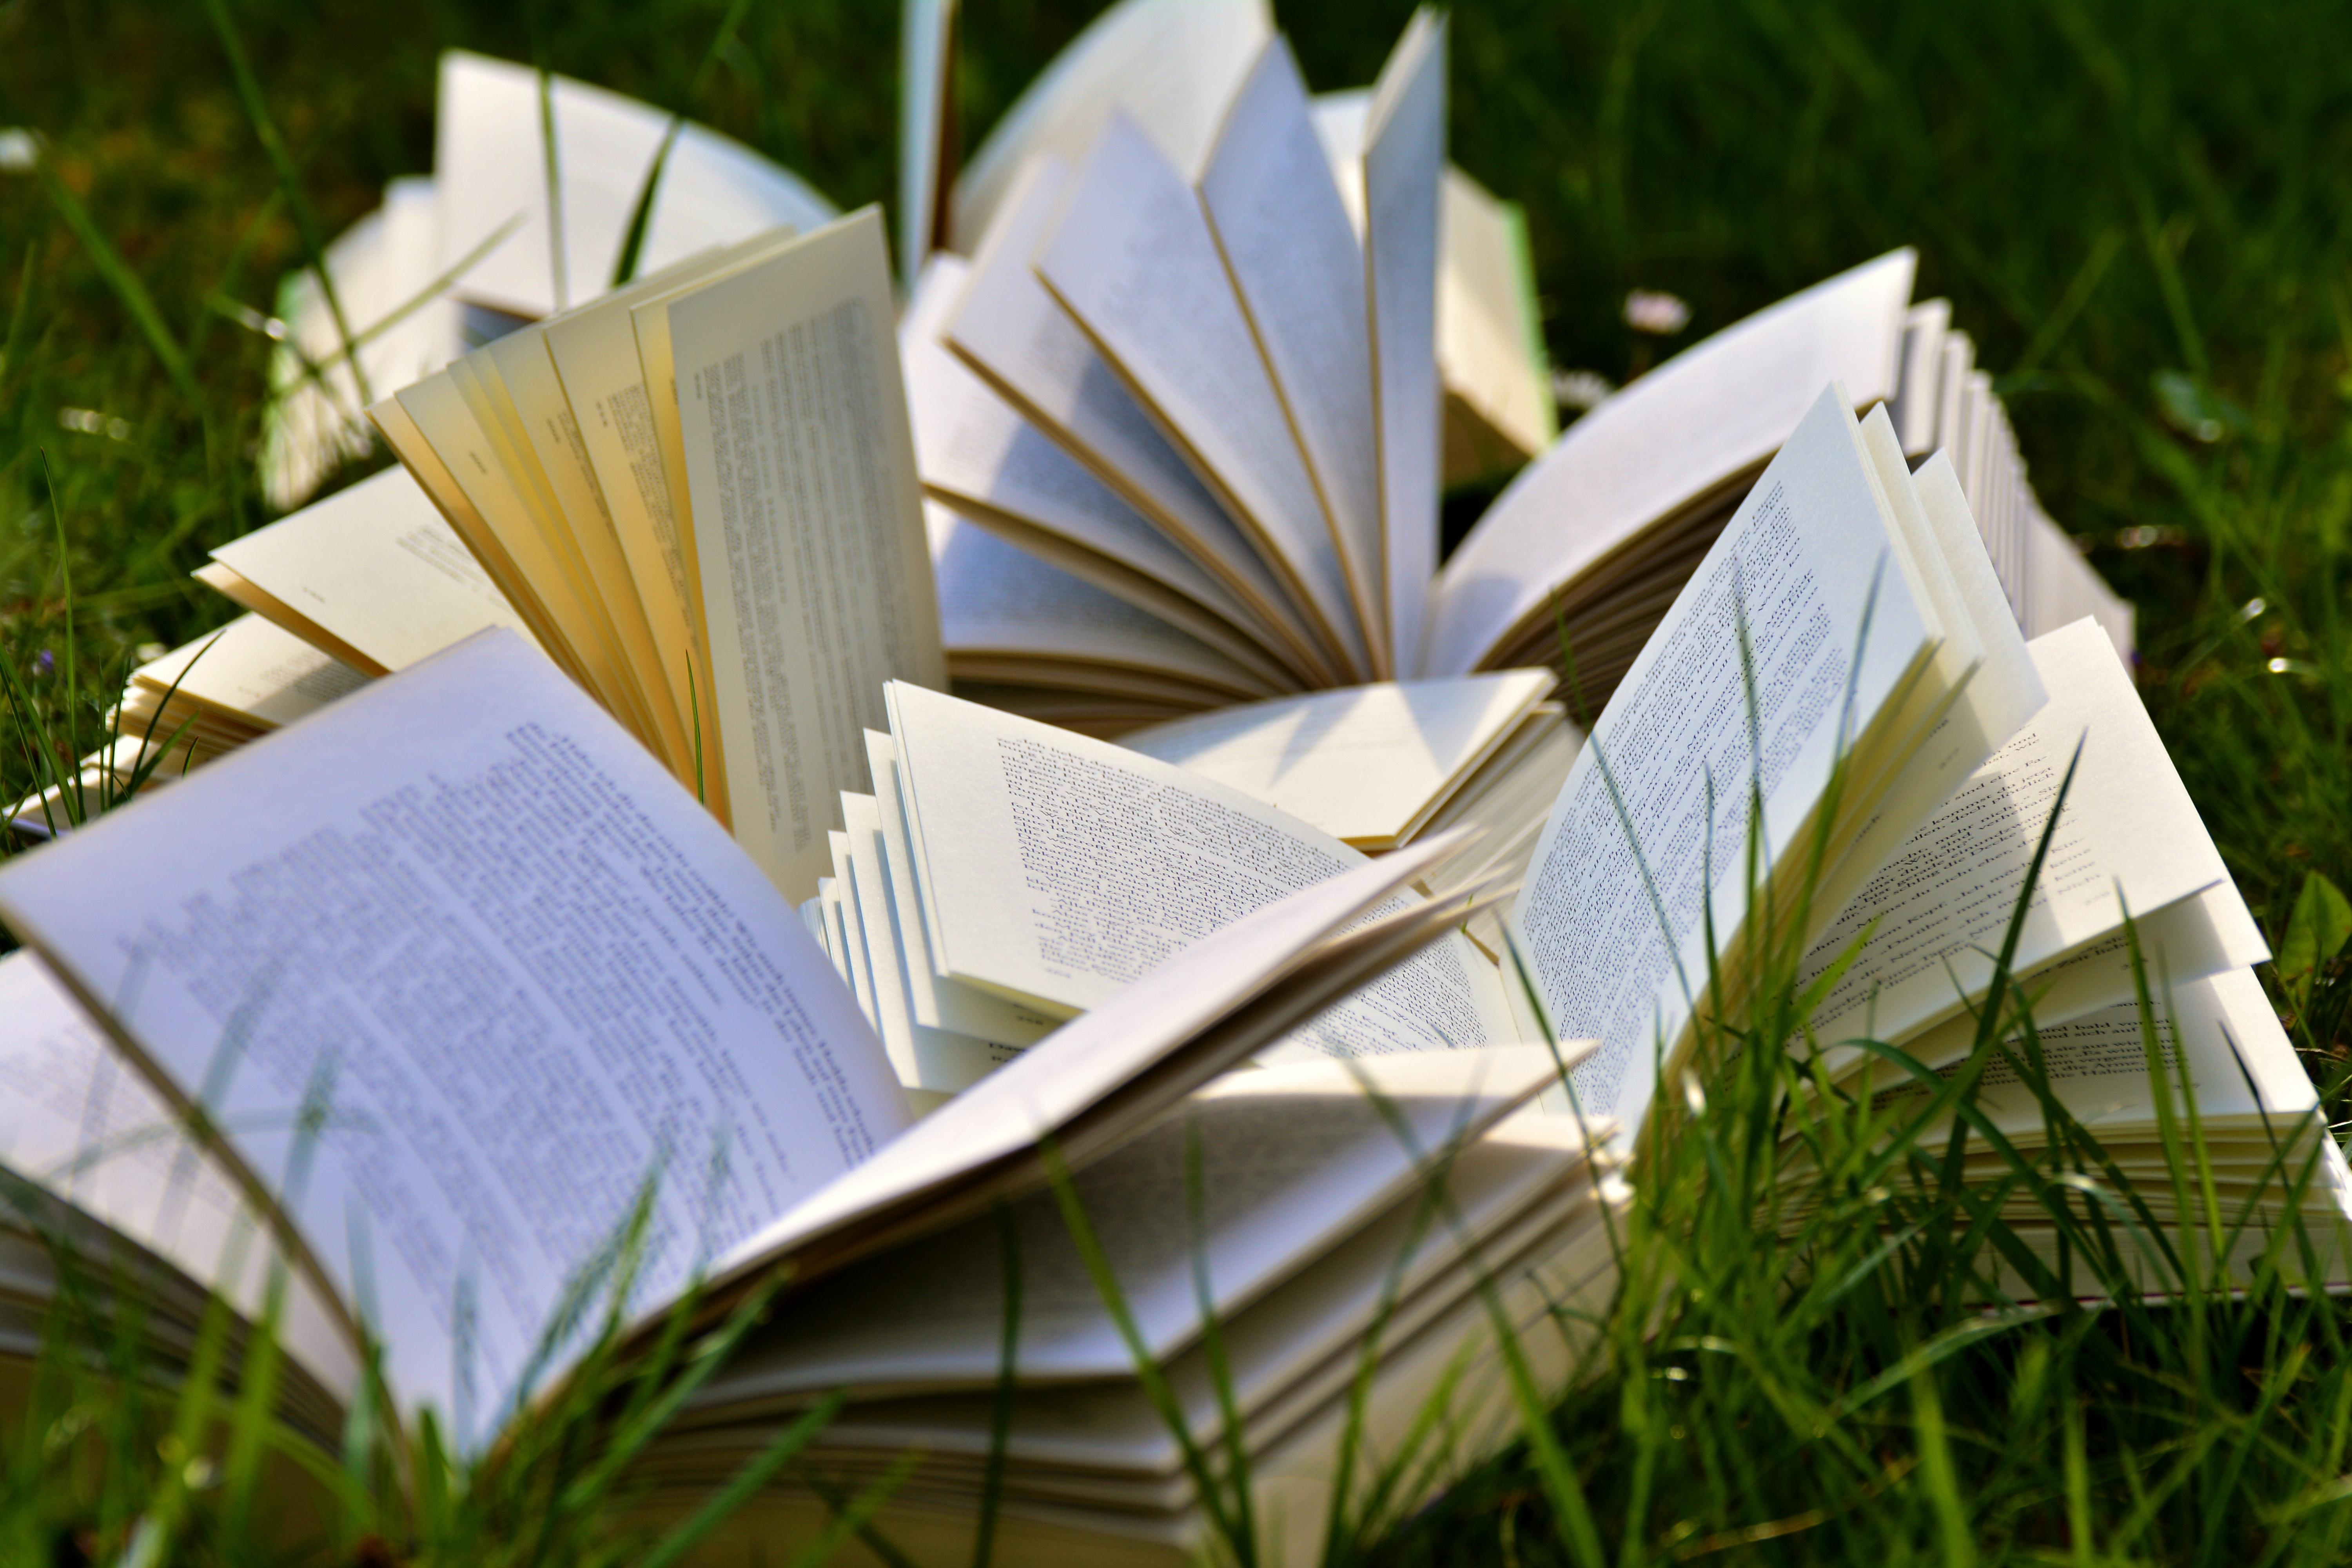 Books on a field